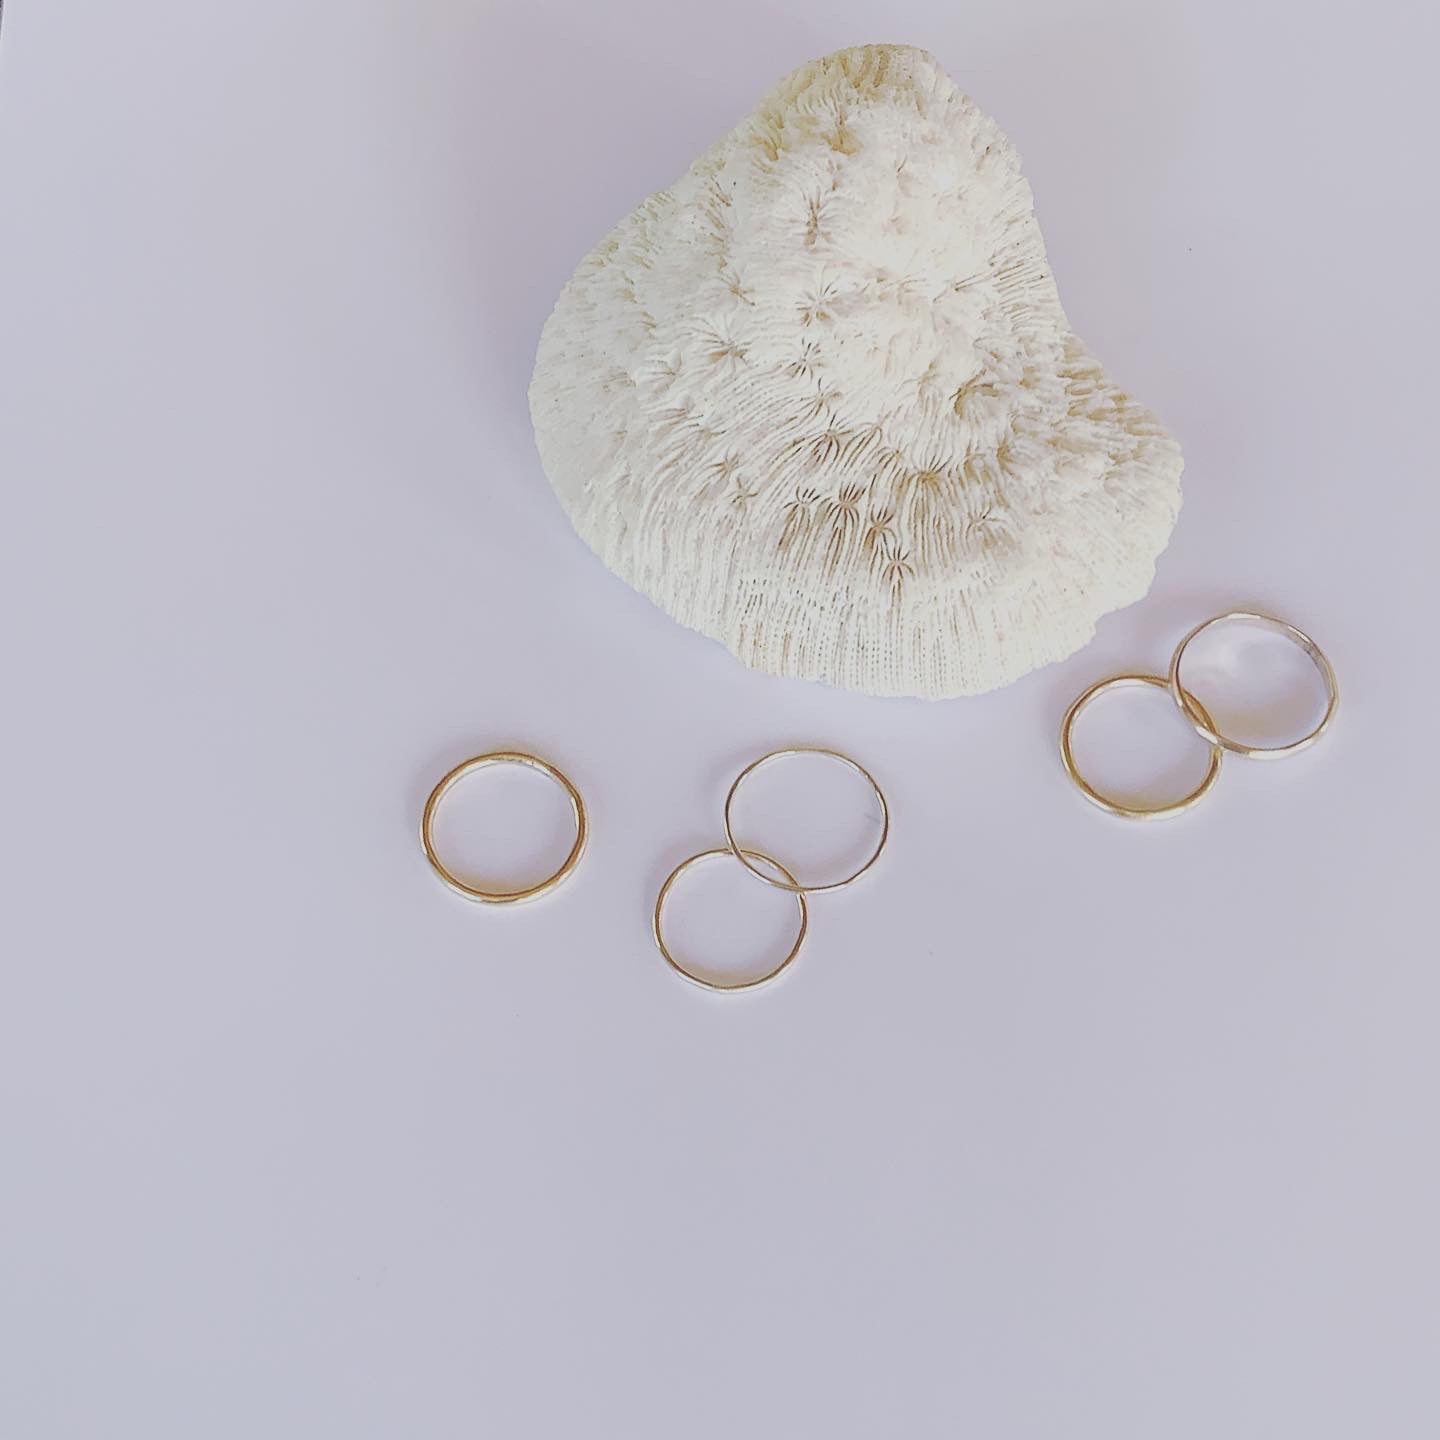 Smooth and serene, complete and forever gold stacker rings  Fine and medium 9 carat gold stacker rings.  It's the simple divine pleasures.